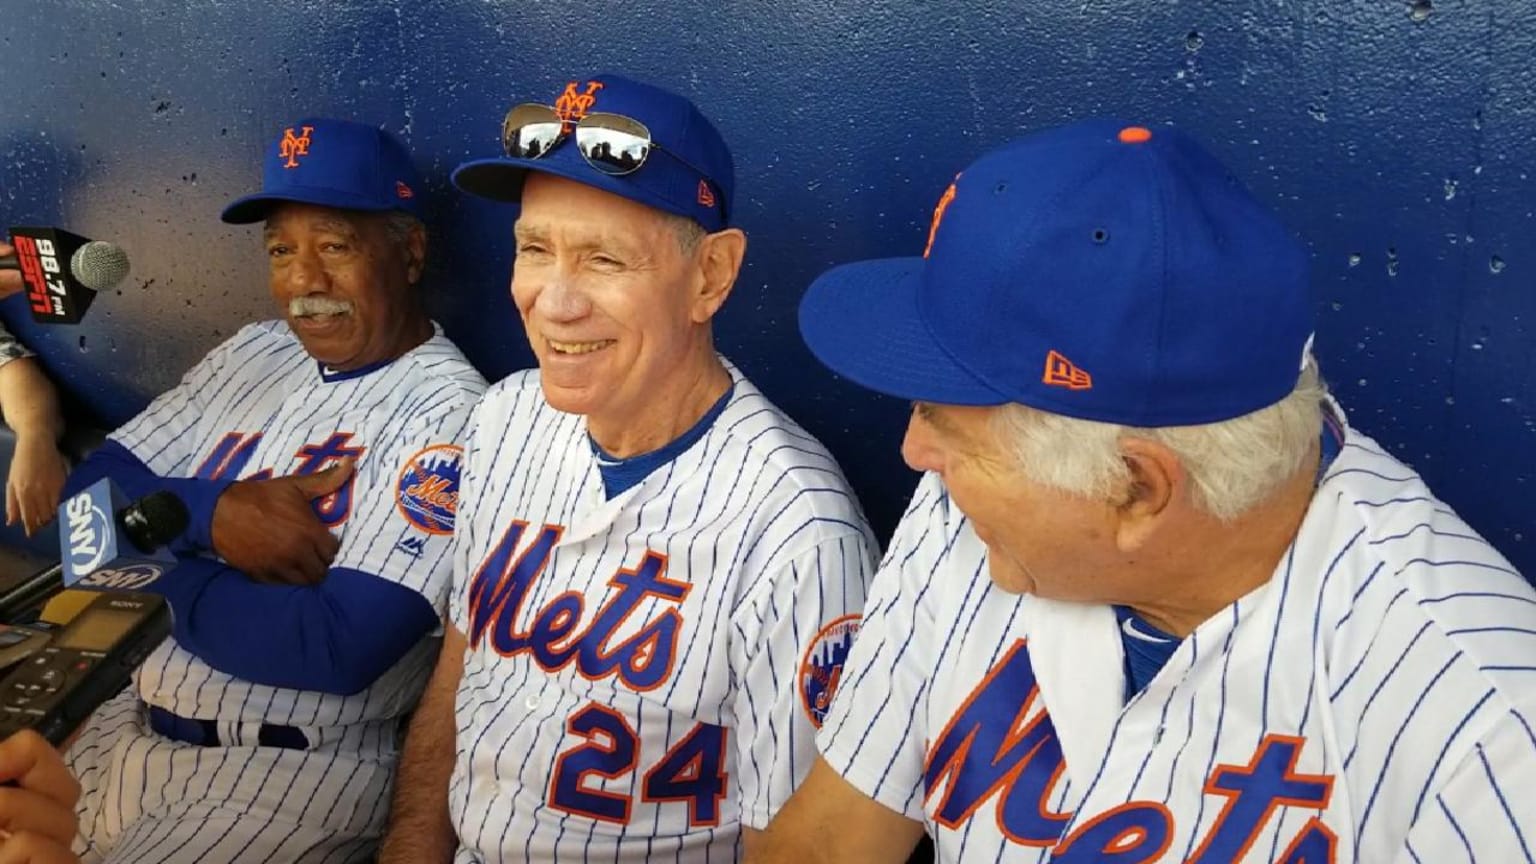 Cleon Jones Excited to Reunite with Miracle Mets, by New York Mets